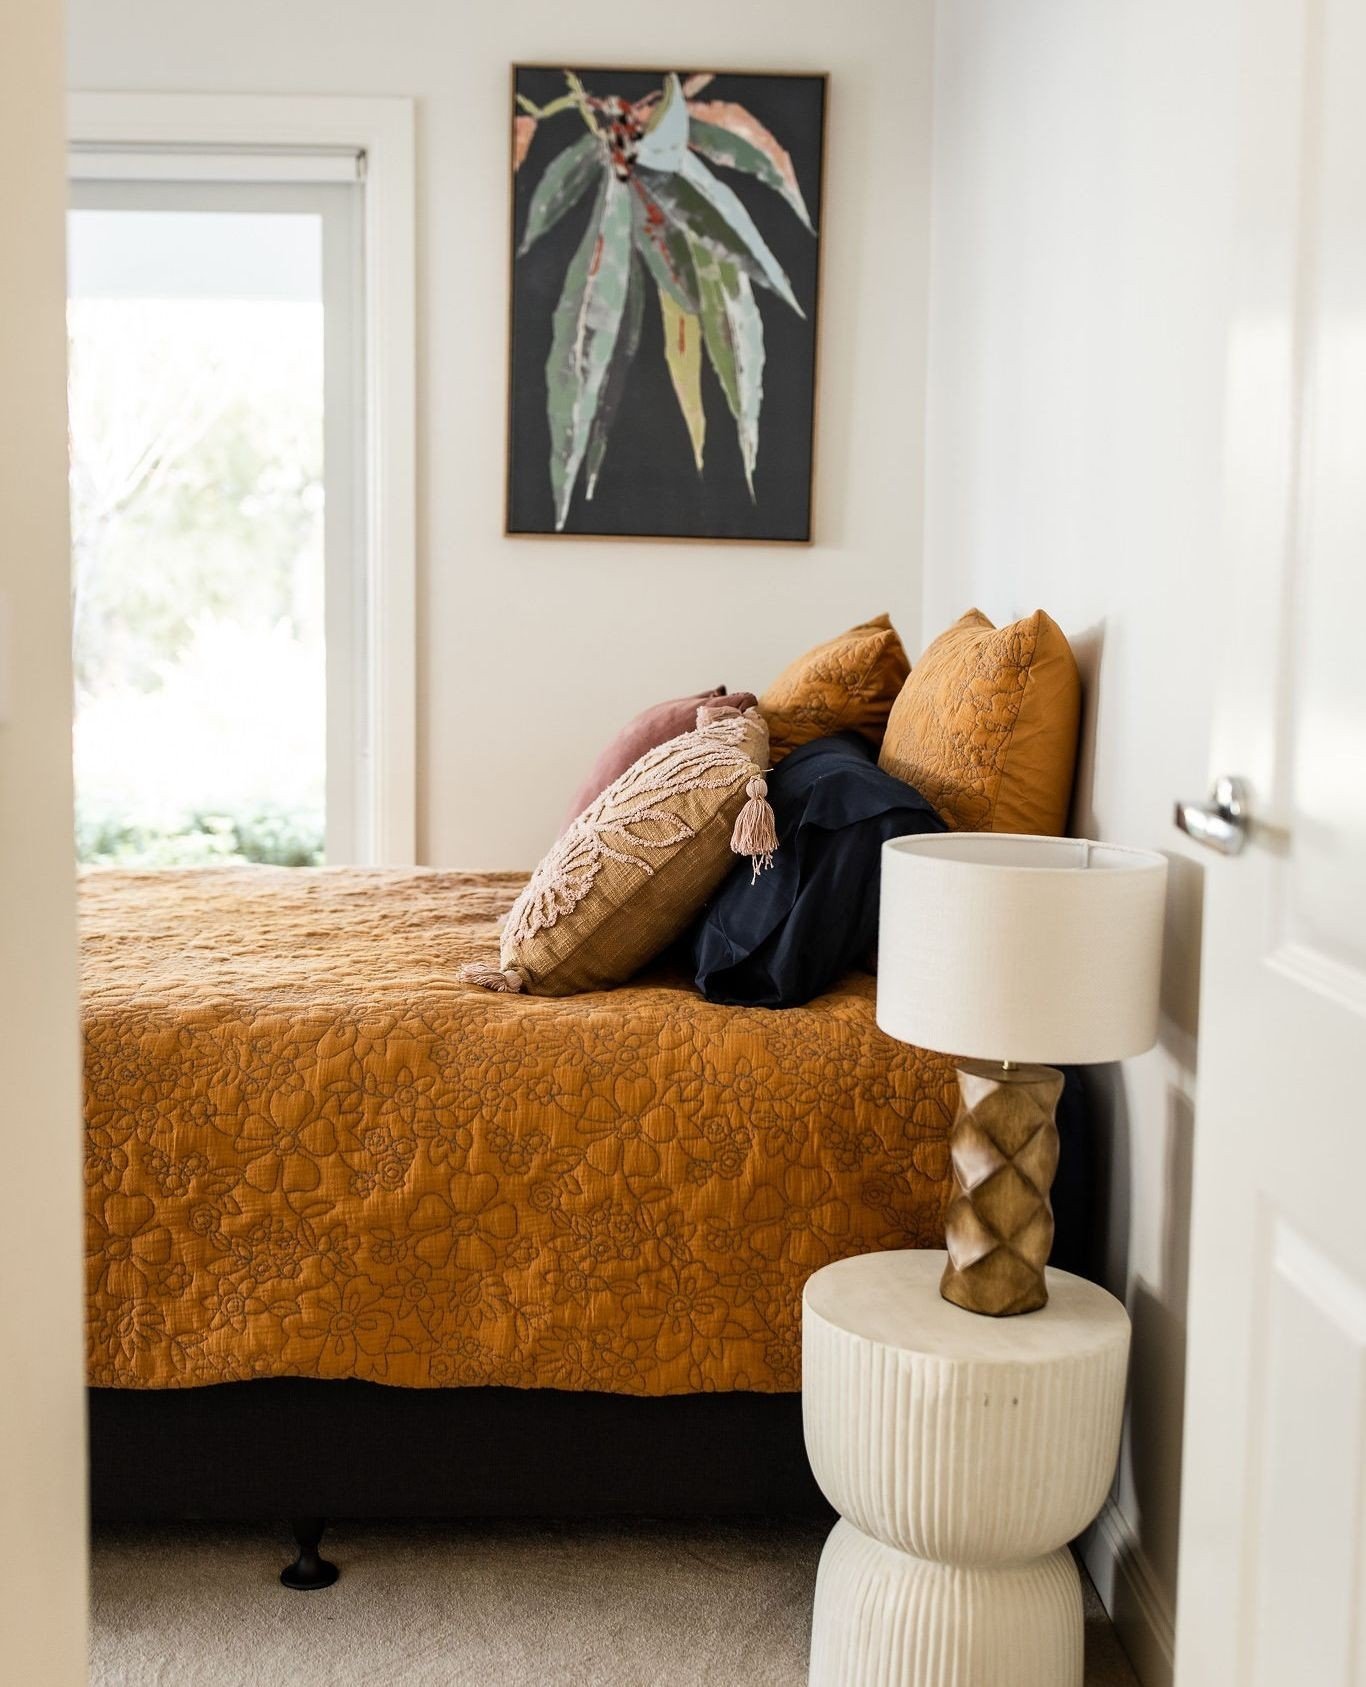 Terracotta linens, we can't get enough of them! Adding a statement look to a bedroom.